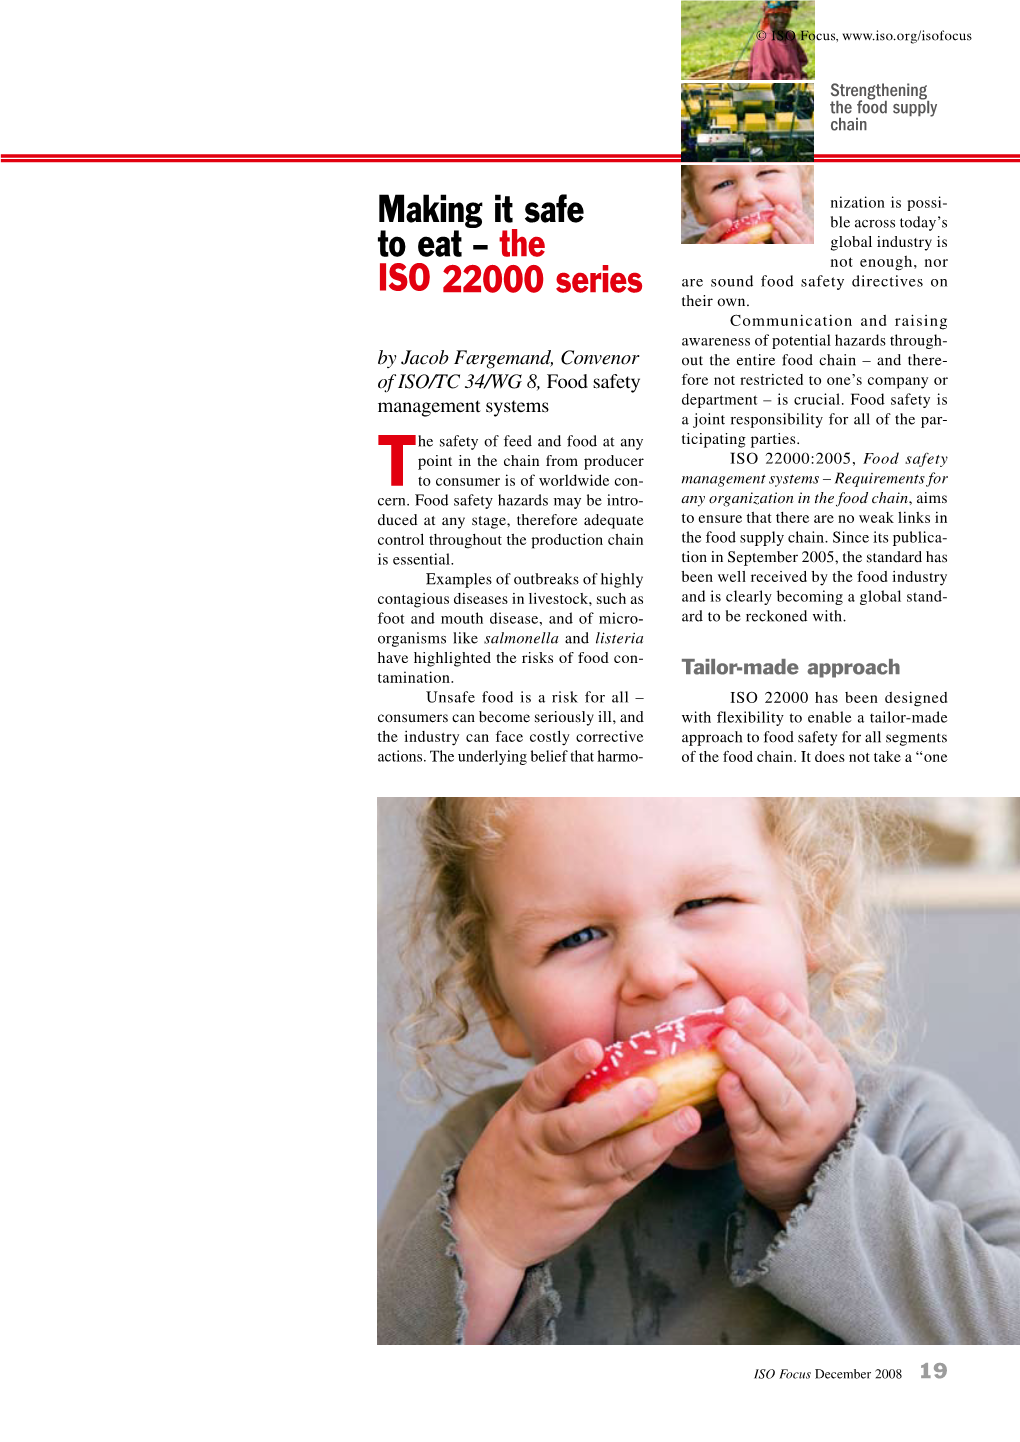 Making It Safe to Eat – the ISO 22000 Series